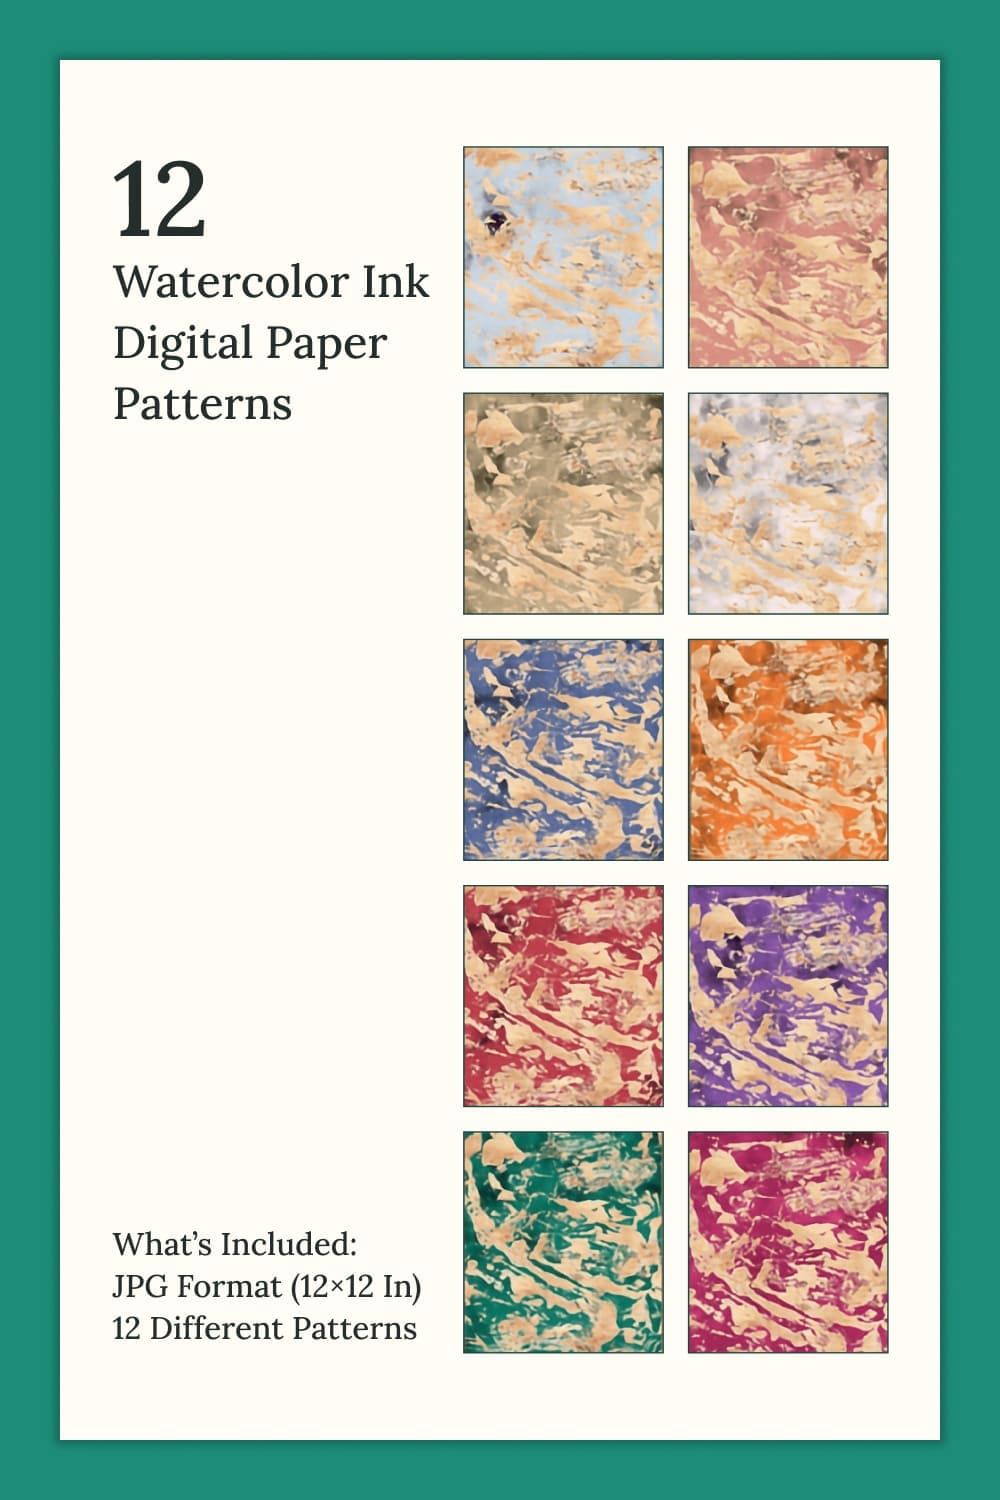 12 paper watercolor patterns with interesting texture.